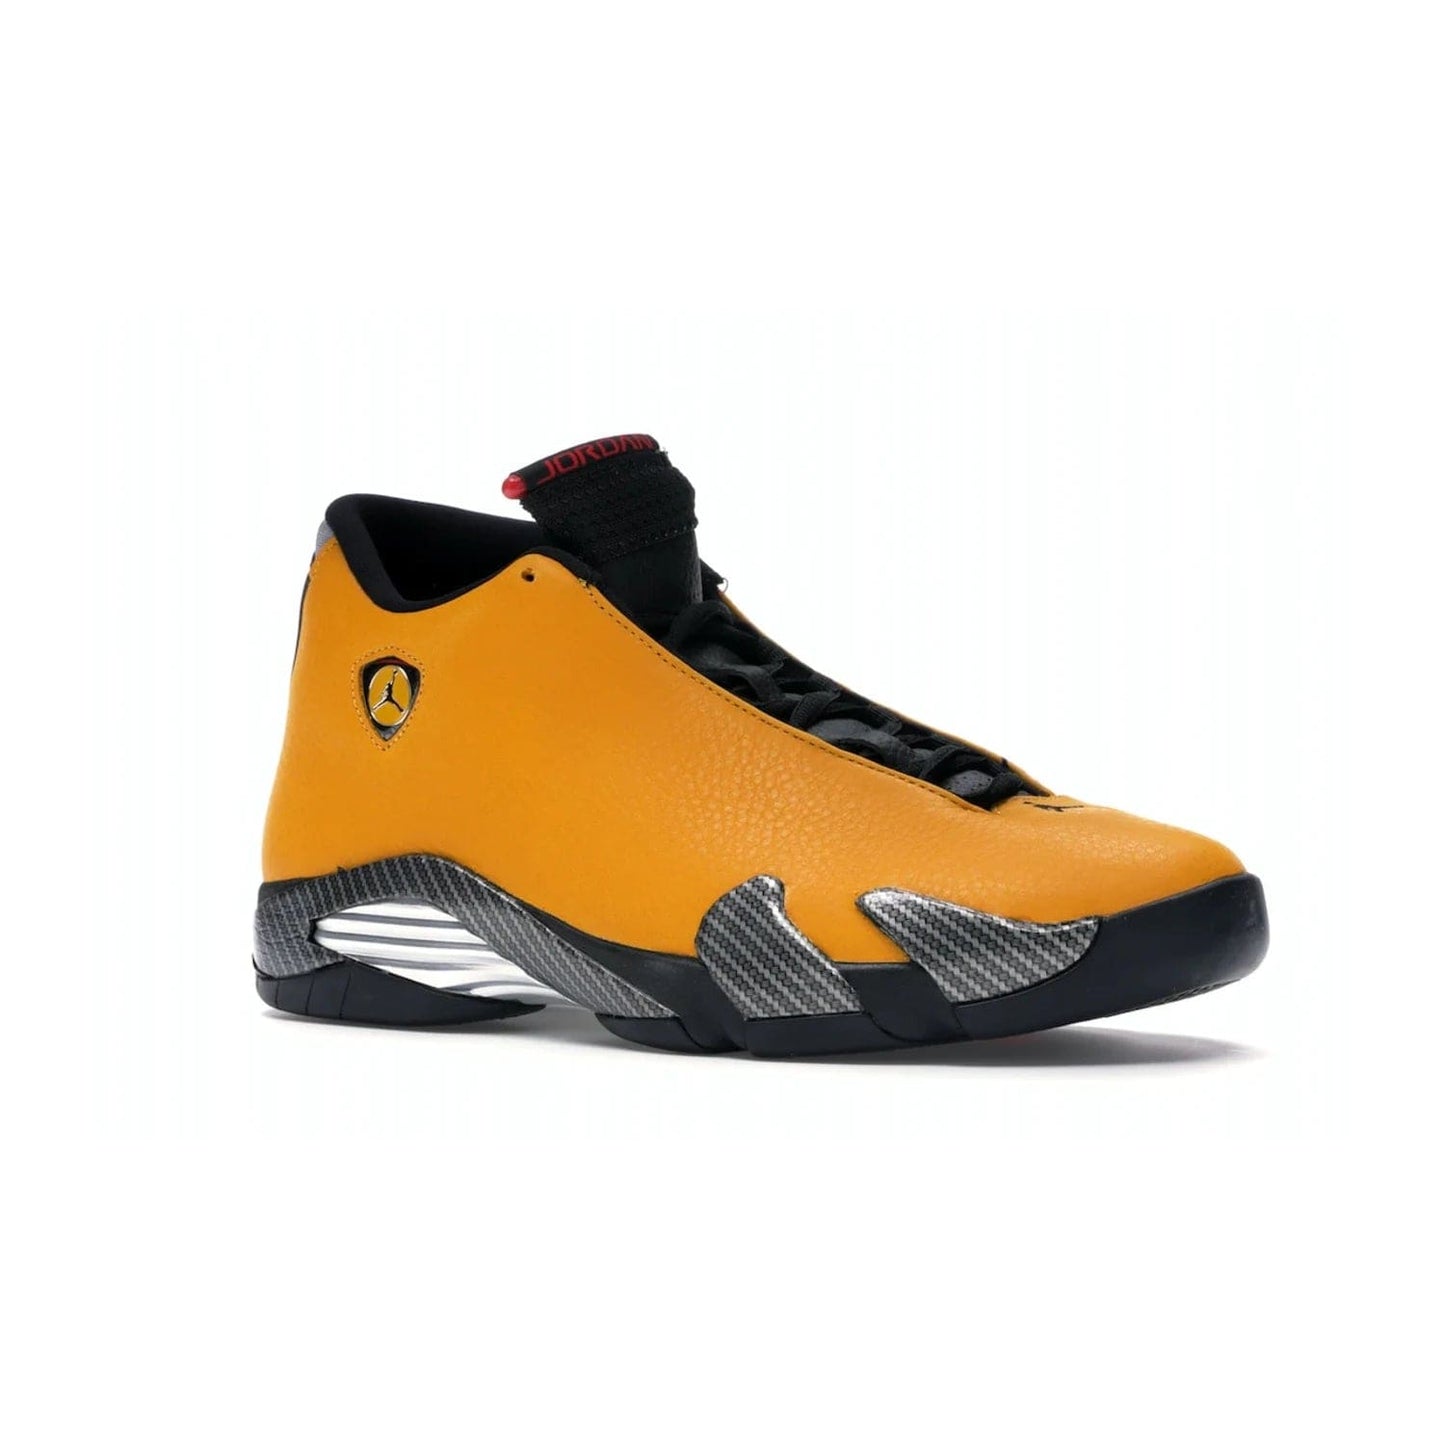 Jordan 14 Retro University Gold - Image 4 - Only at www.BallersClubKickz.com - Air Jordan 14 Retro University Gold: High-quality leather sneaker with Jumpman, tongue & heel logos. Zoom Air units & herringbone traction for superior comfort. University Gold outsole for stylish streetwear.